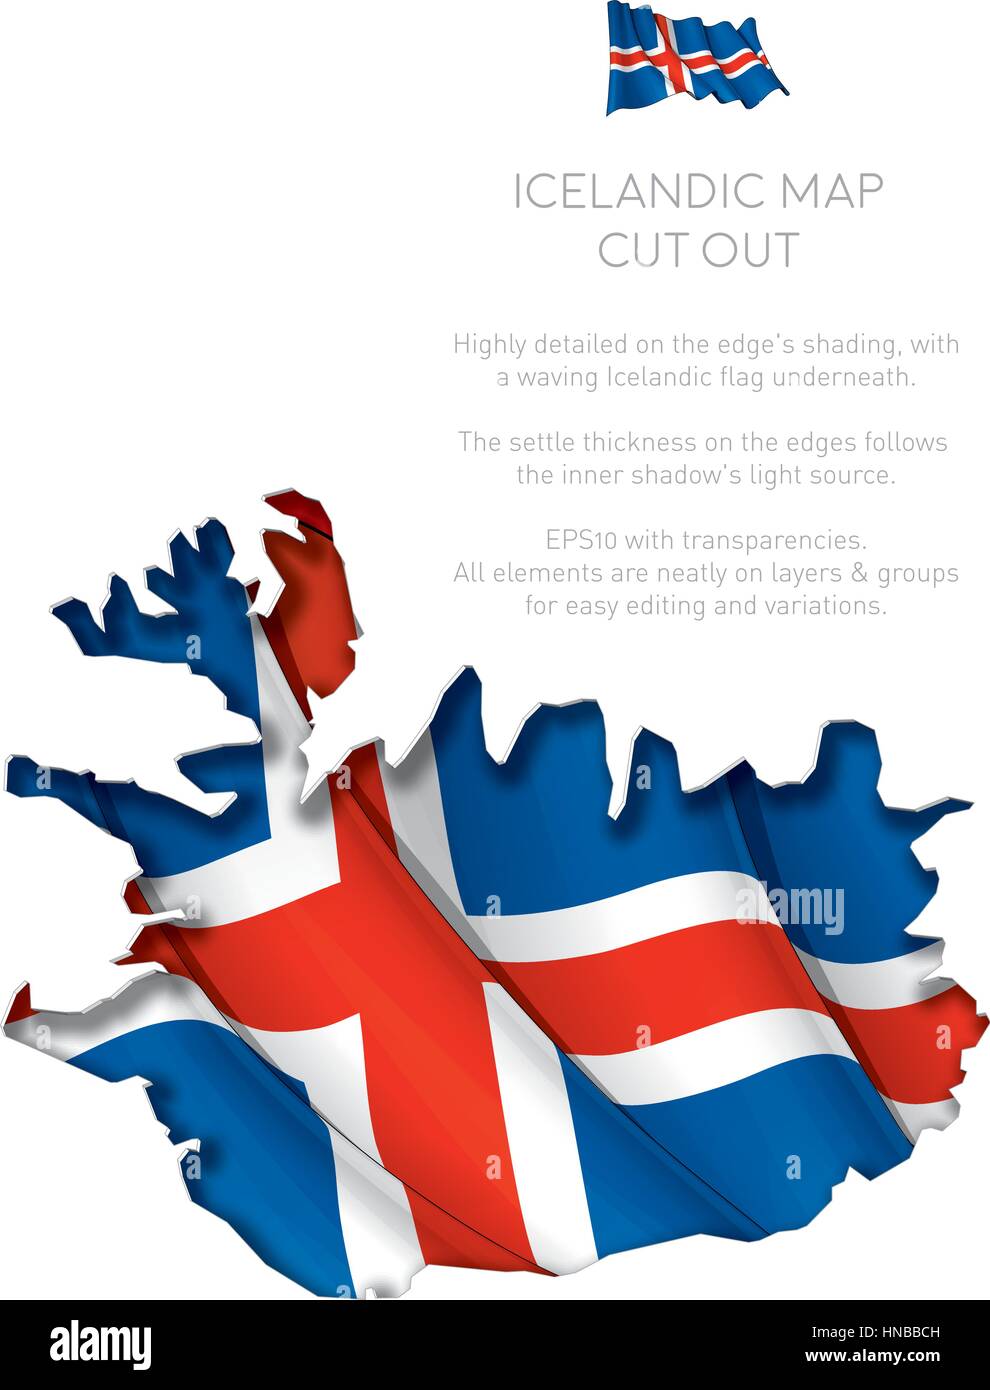 Vector Illustration of a cut out Map of Iceland with a waving Icelandic flag underneath. All elements neatly on layers and groups for easy editing and Stock Vector